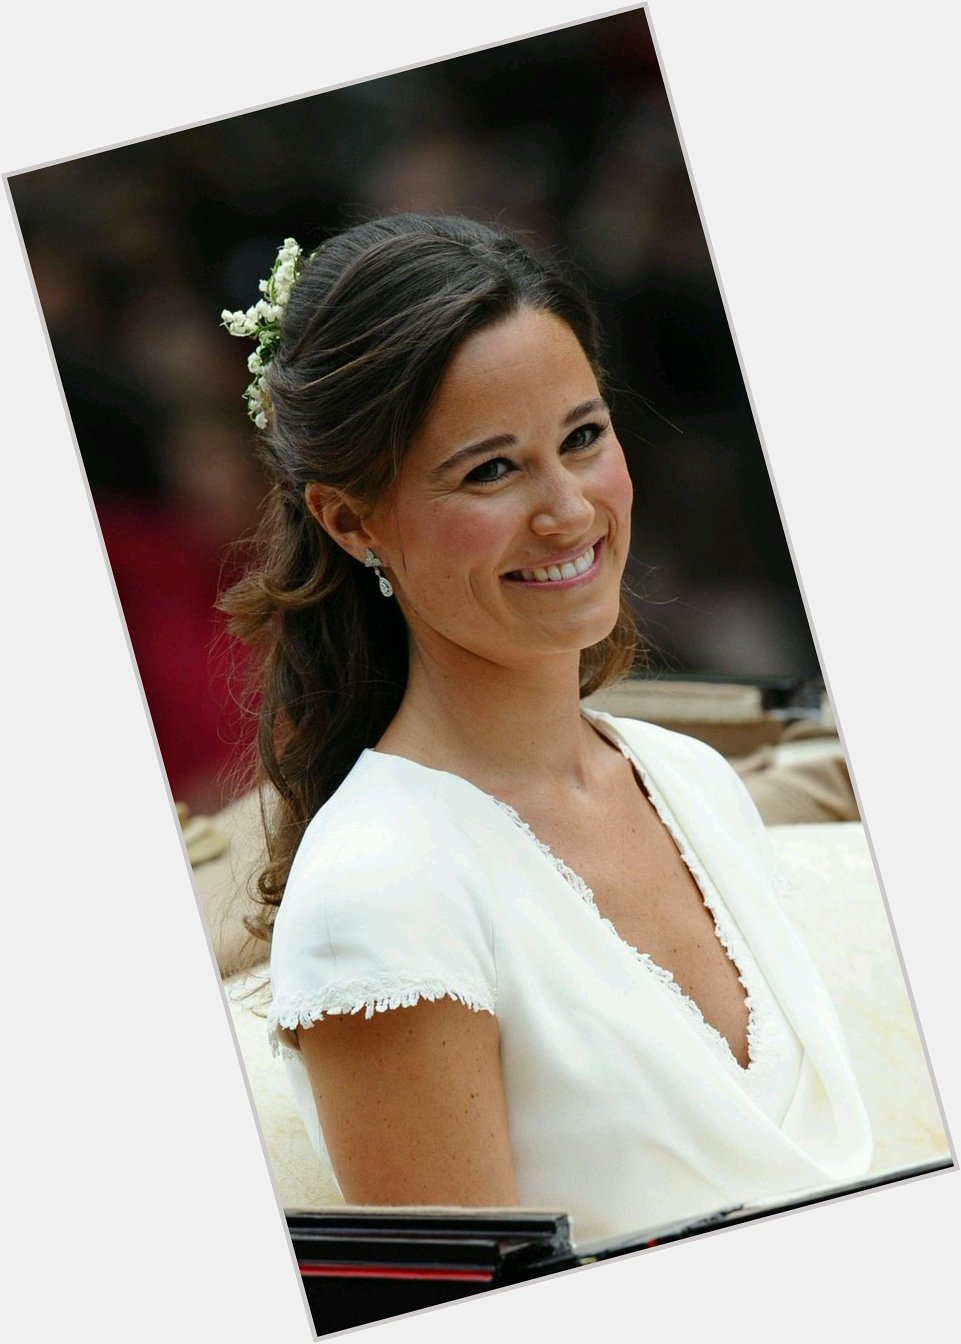 Happy Birthday, Pippa Middleton, born September 6, 1983, in Reading, England. A genuine \"English muffin!\"  